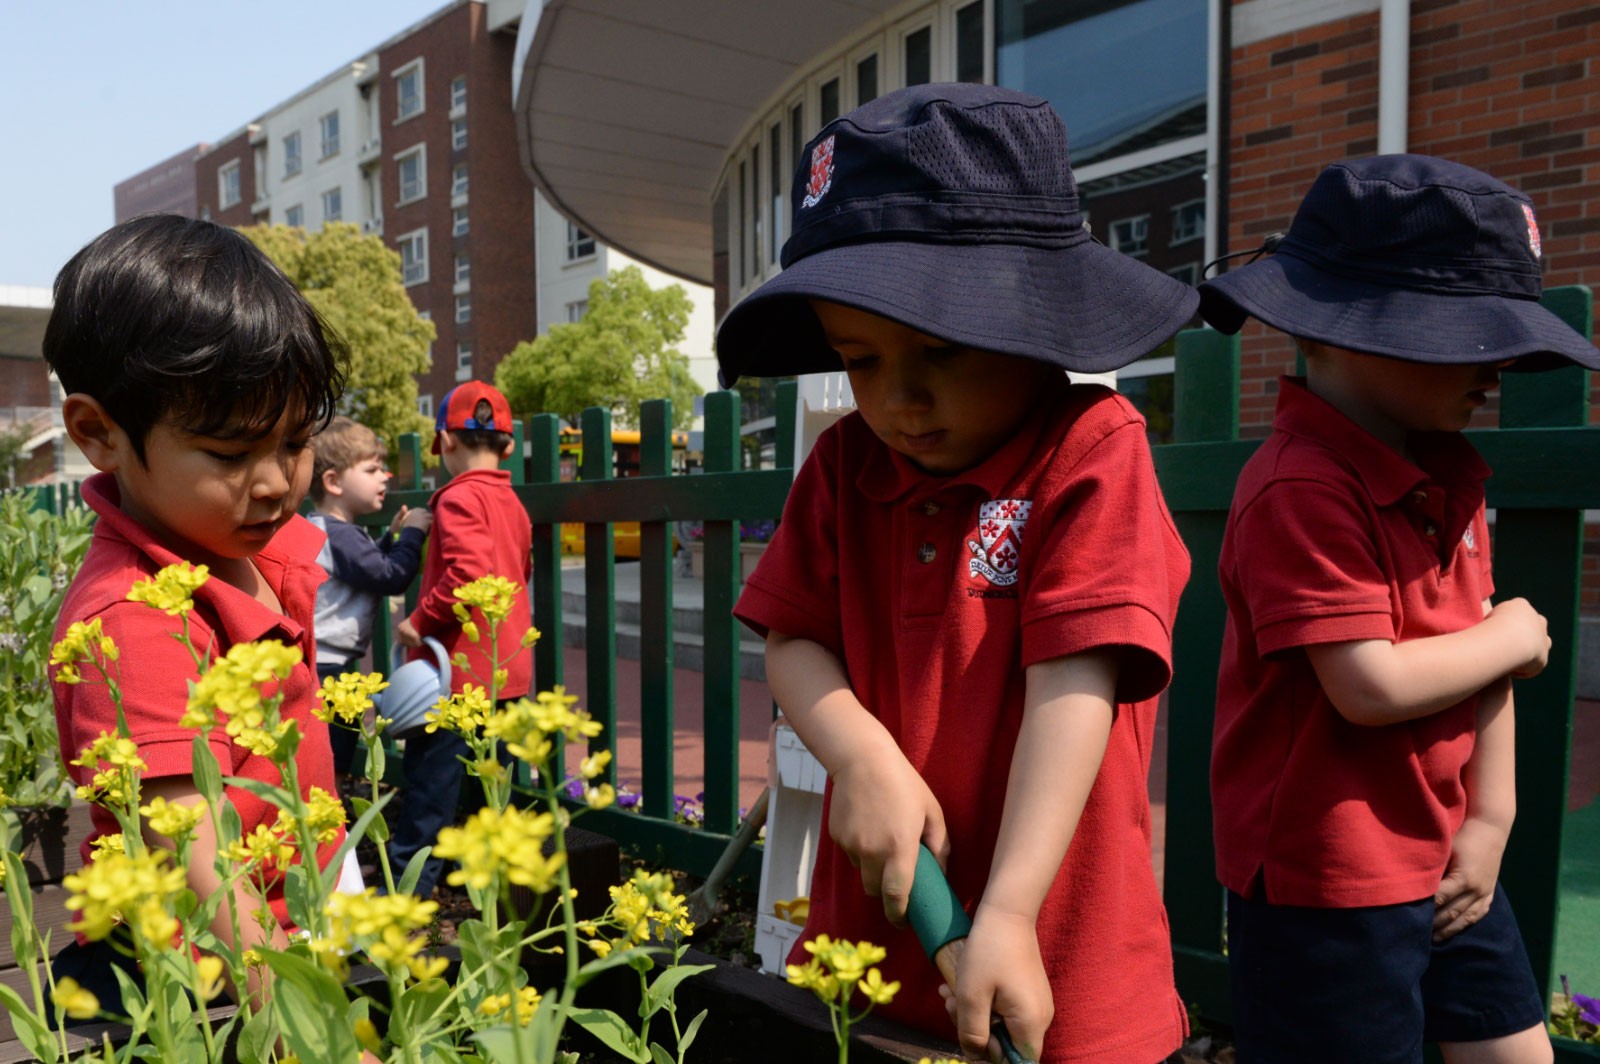 Students in Dulwich's Early Years School taking part activity outdoors